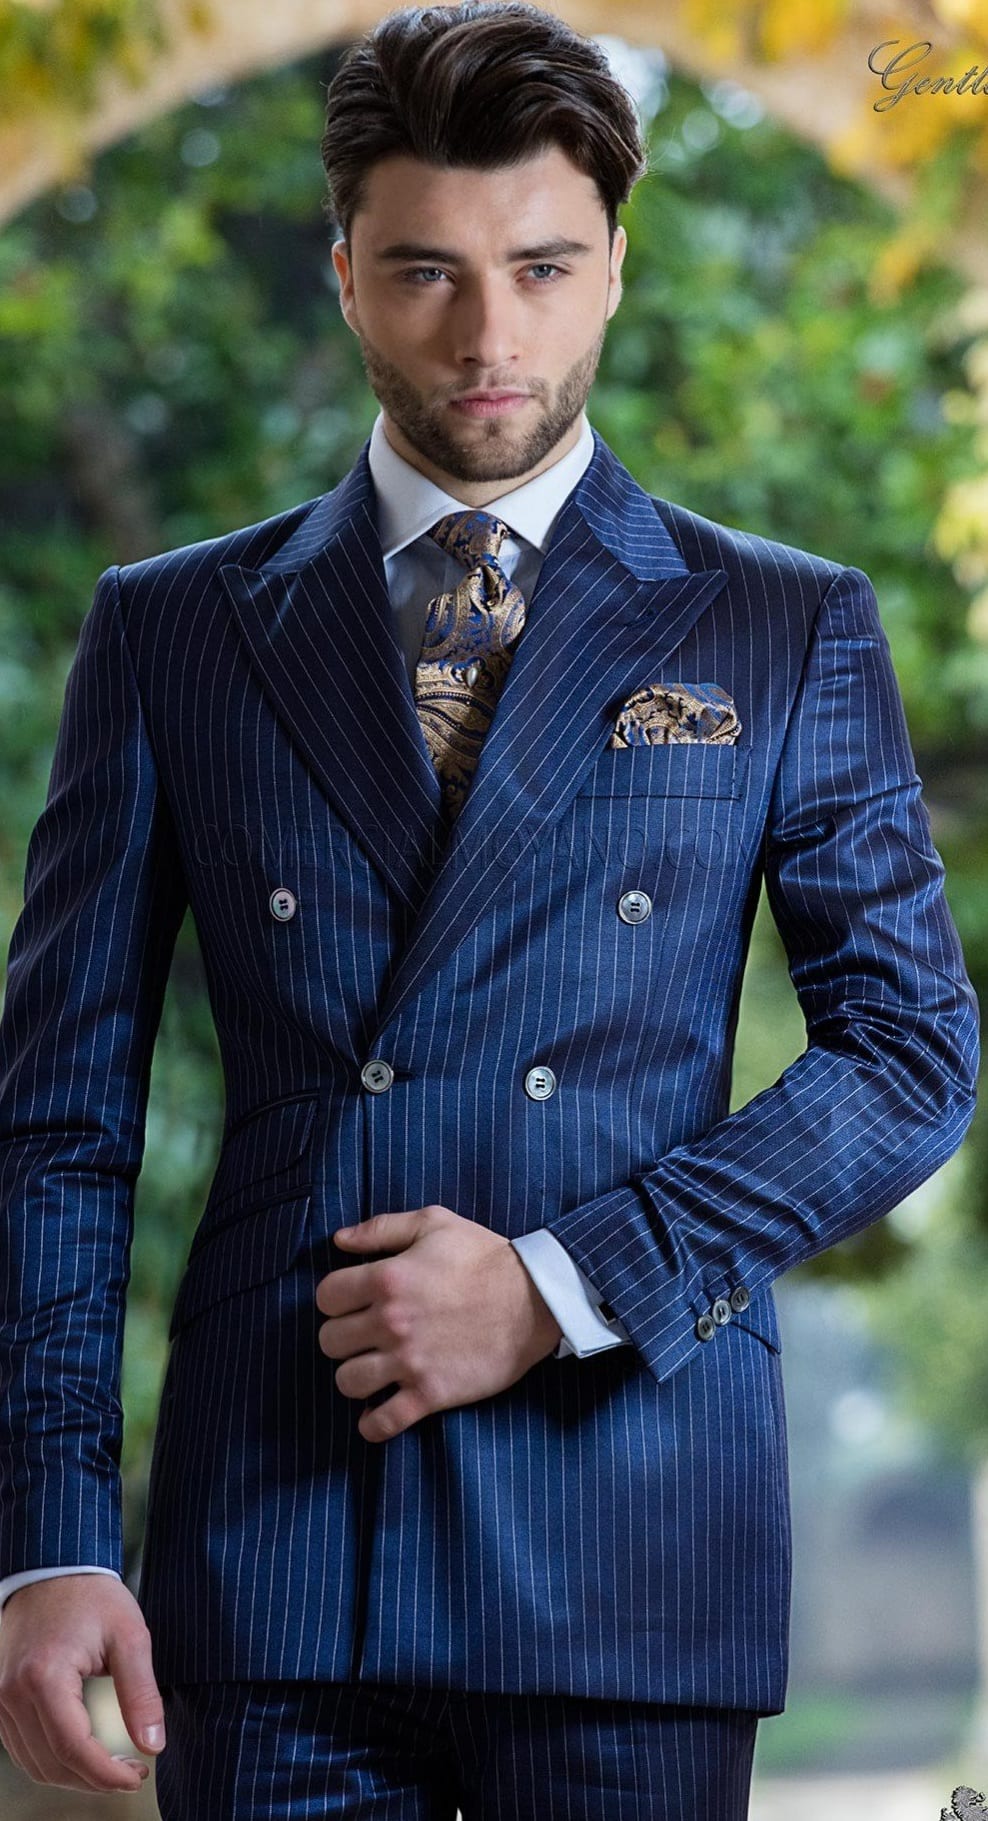 Royal Blue Double Breasted Suit outfit for men